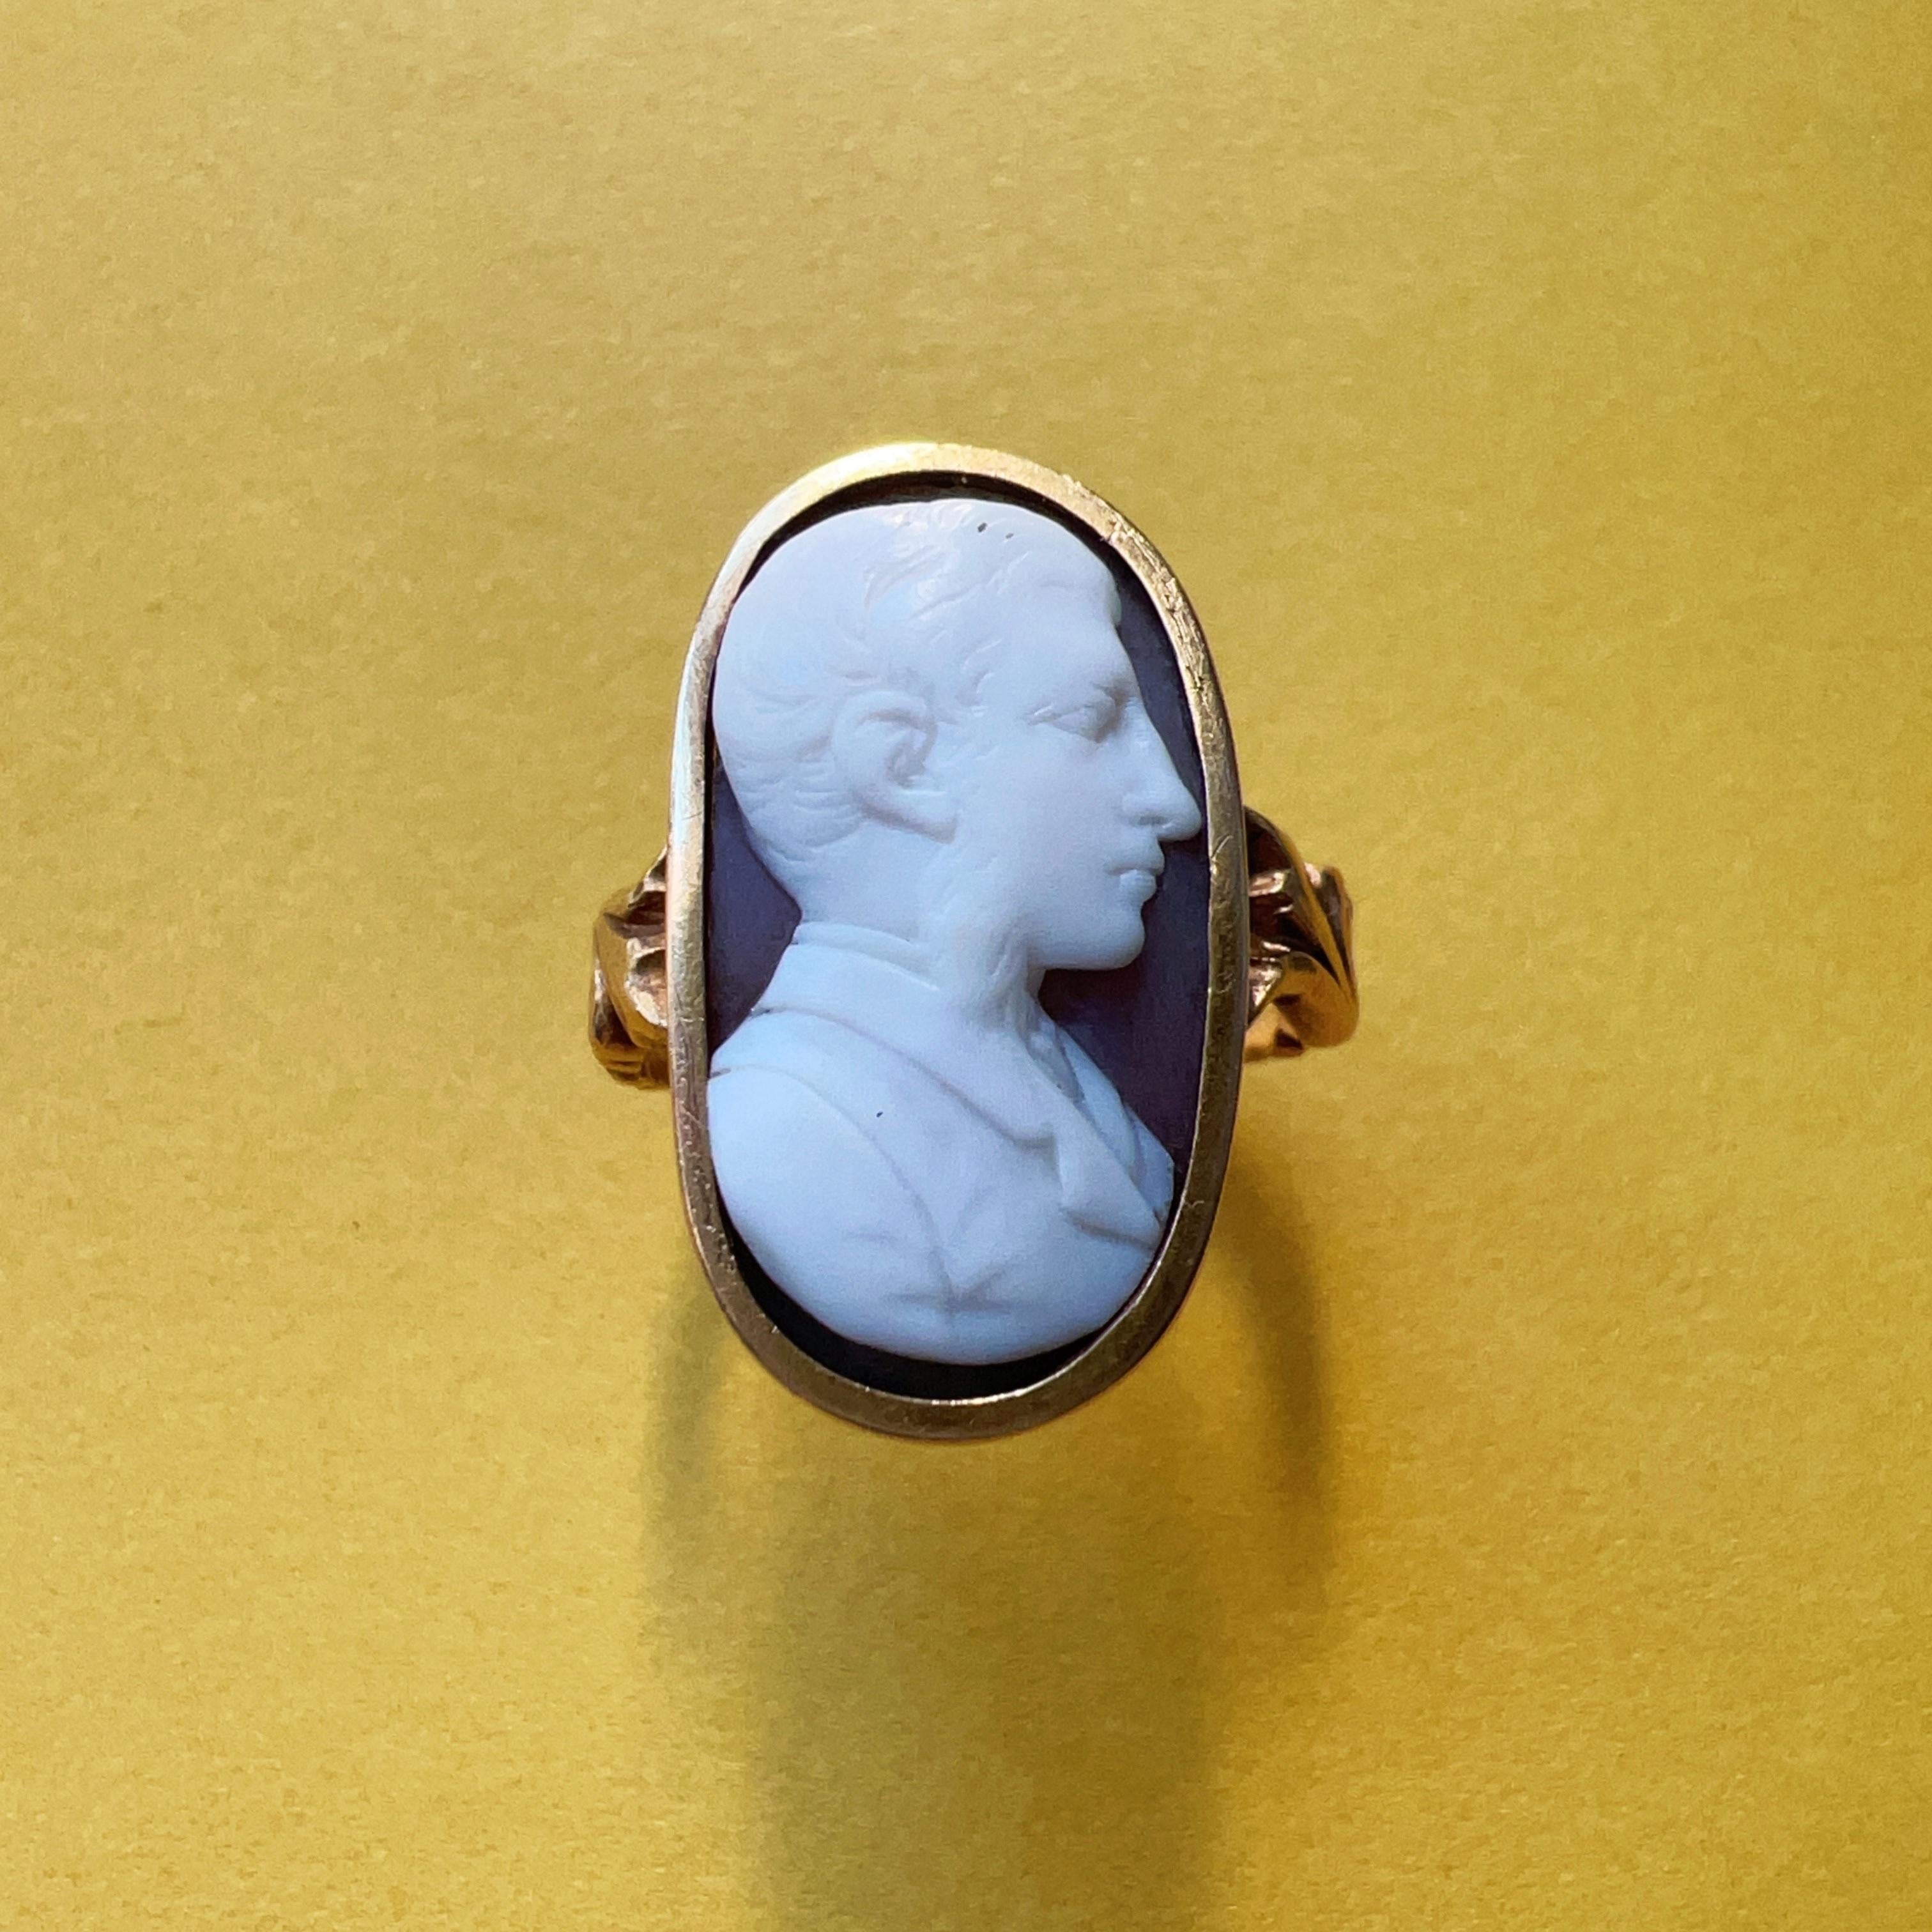 For sale a 18th Century 18K gold empire period cameo ring.

This rare ring showcases a remarkable white and brown two-colored hard stone cameo portraying the profile of a distinguished gentleman. The intricacies of his hair, beard, and clothing are